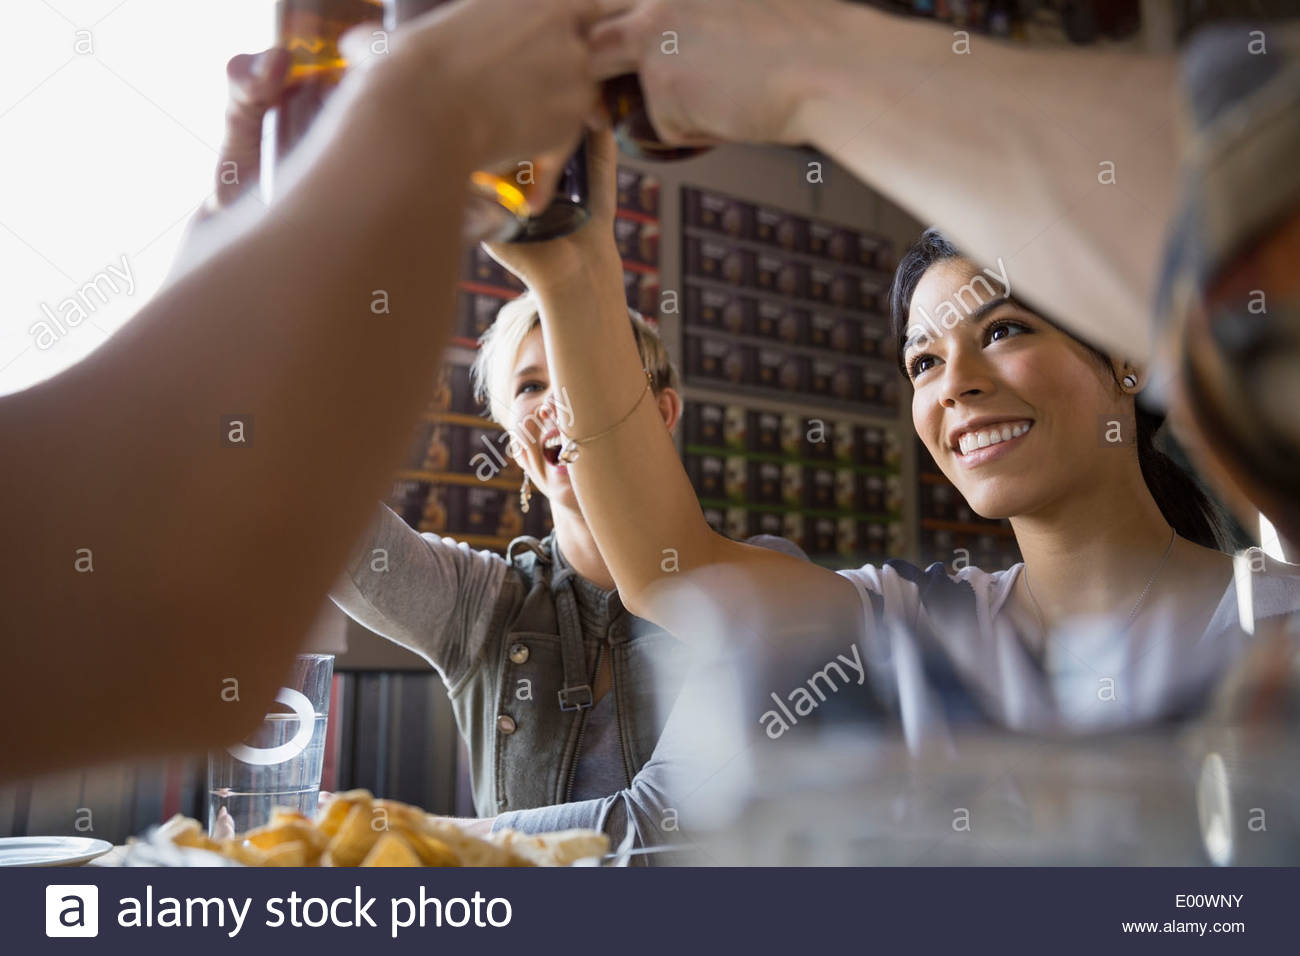 Friends toasting beer glasses at brewery Stock Photo